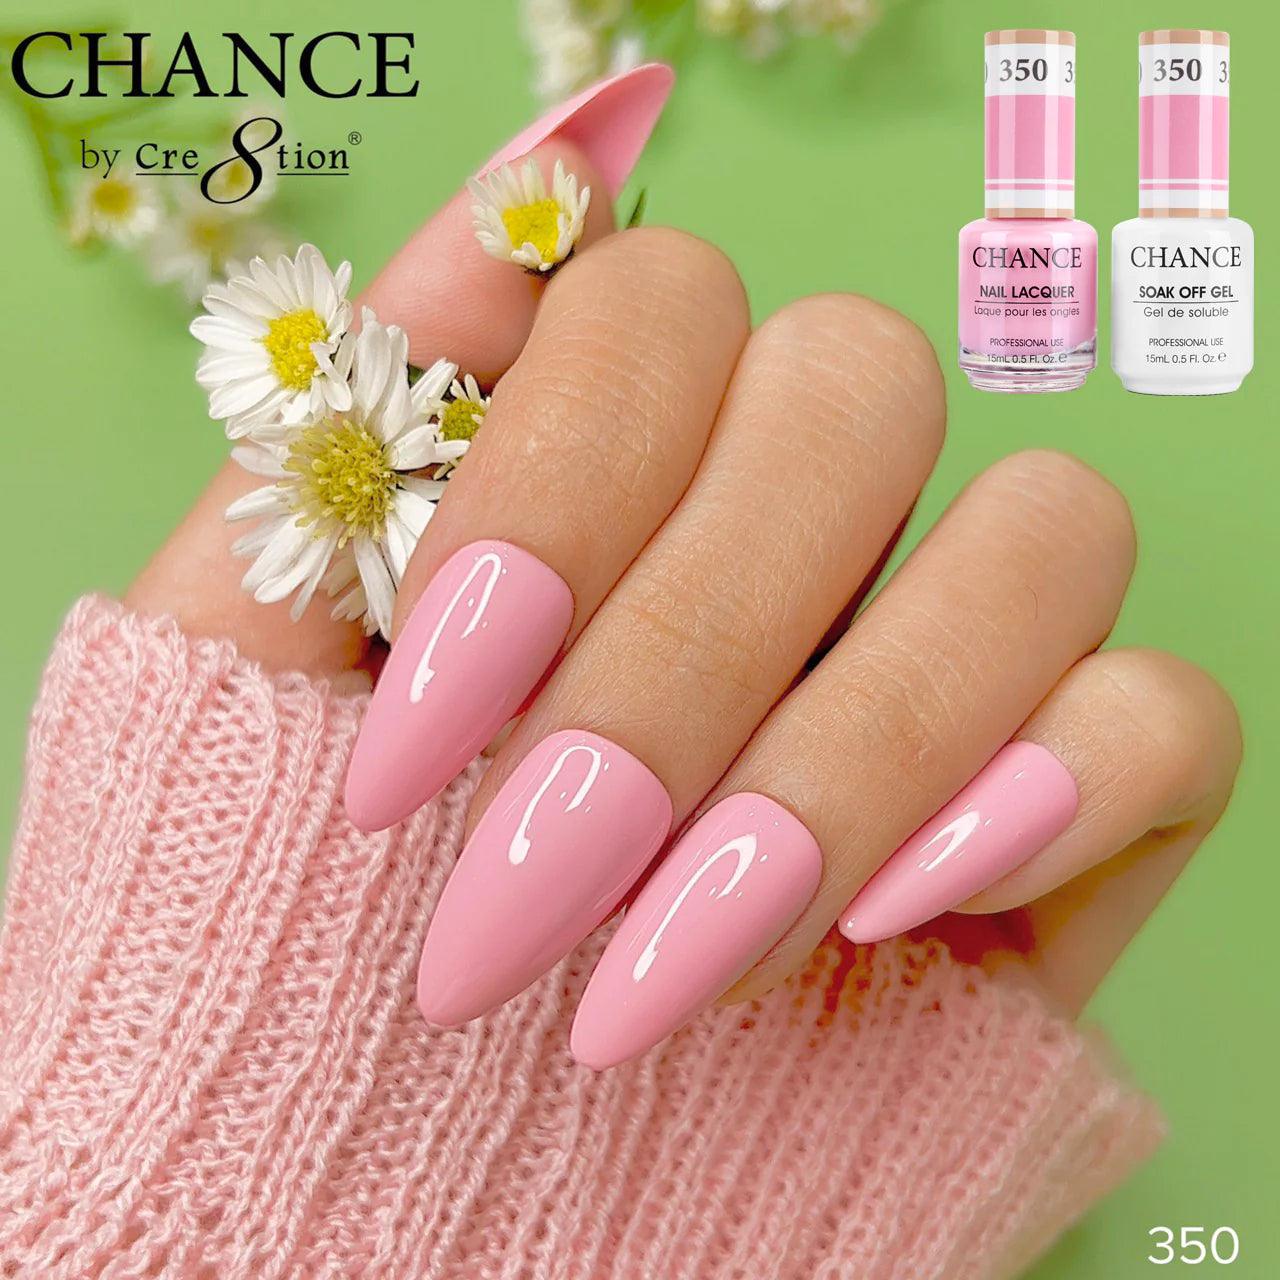 Chance Duo Gel & Matching Lacquer 0.5oz - Set of 5 colors (334 - 350 - 331 - 348 - 336)